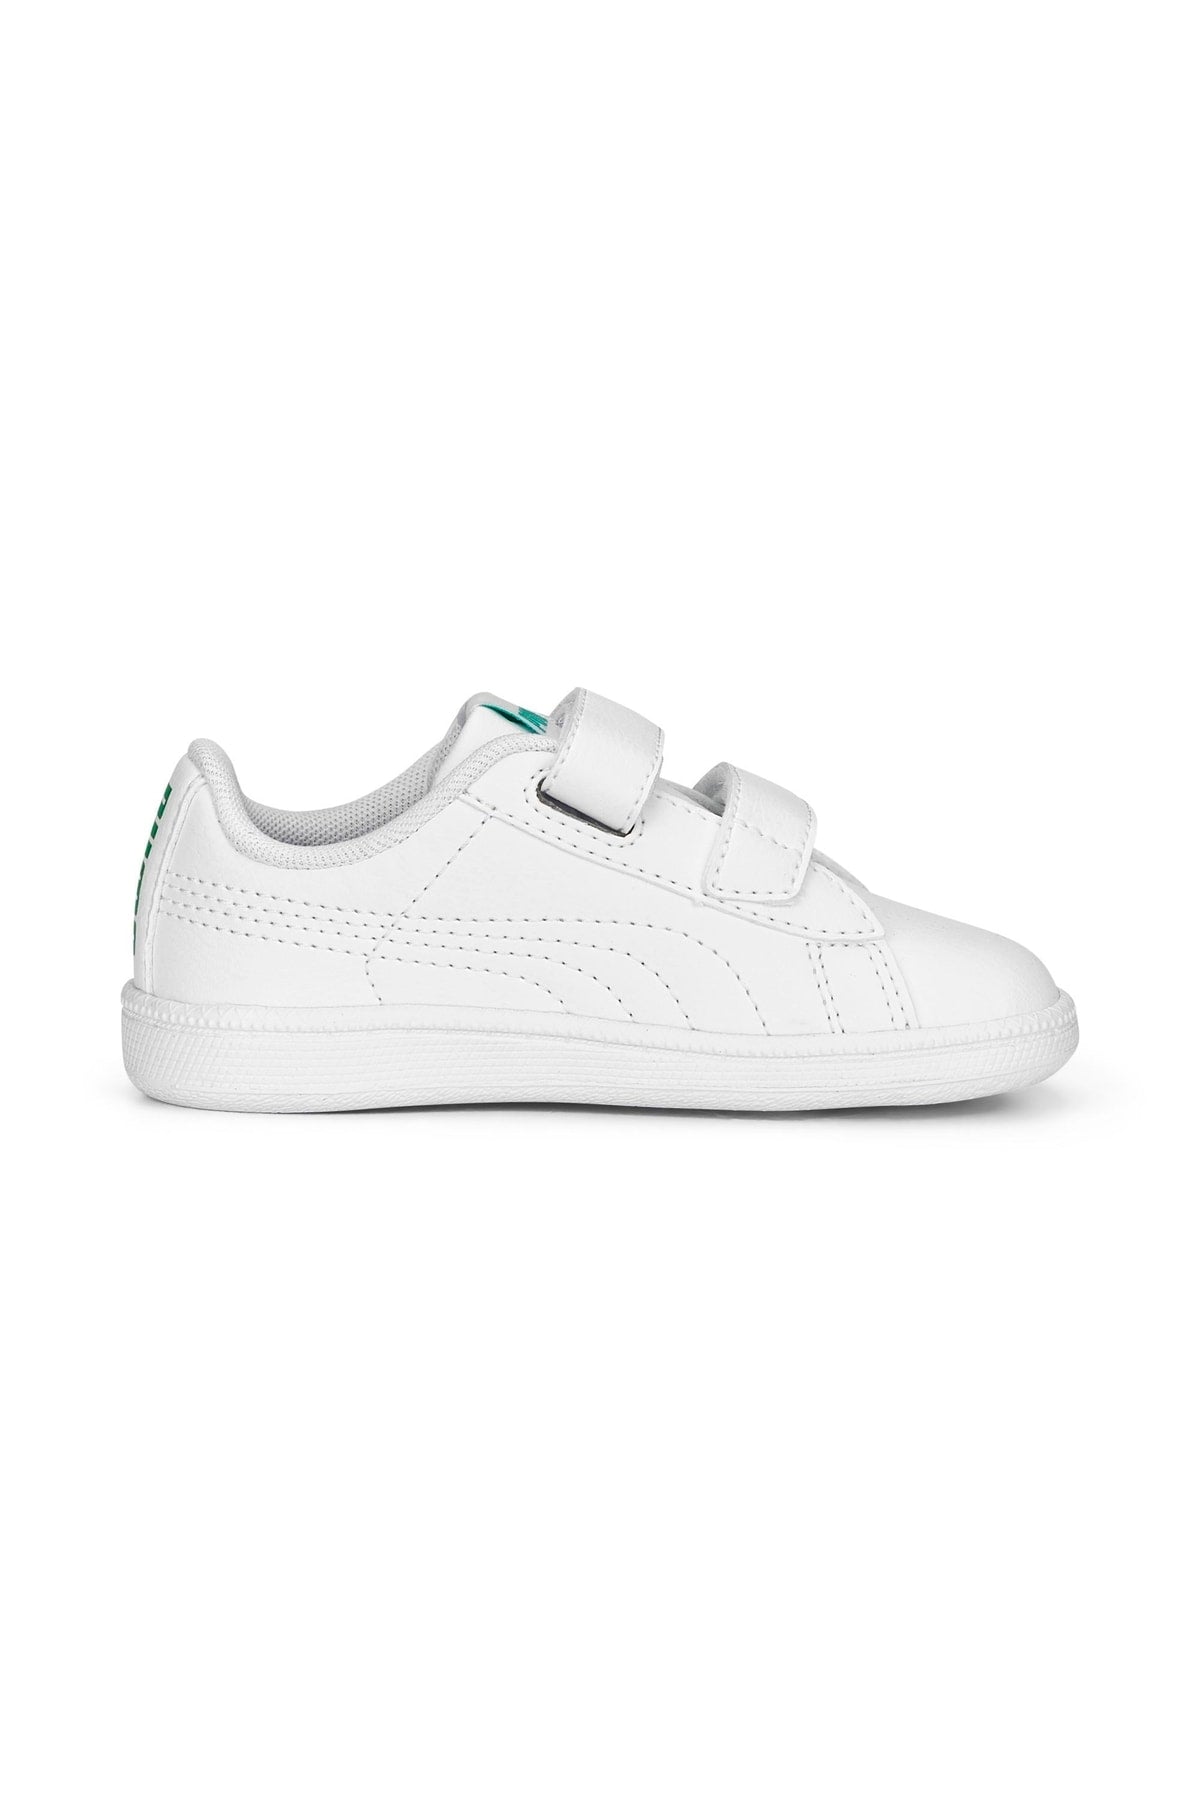 UP V Inf - White Unisex Baby Sneakers